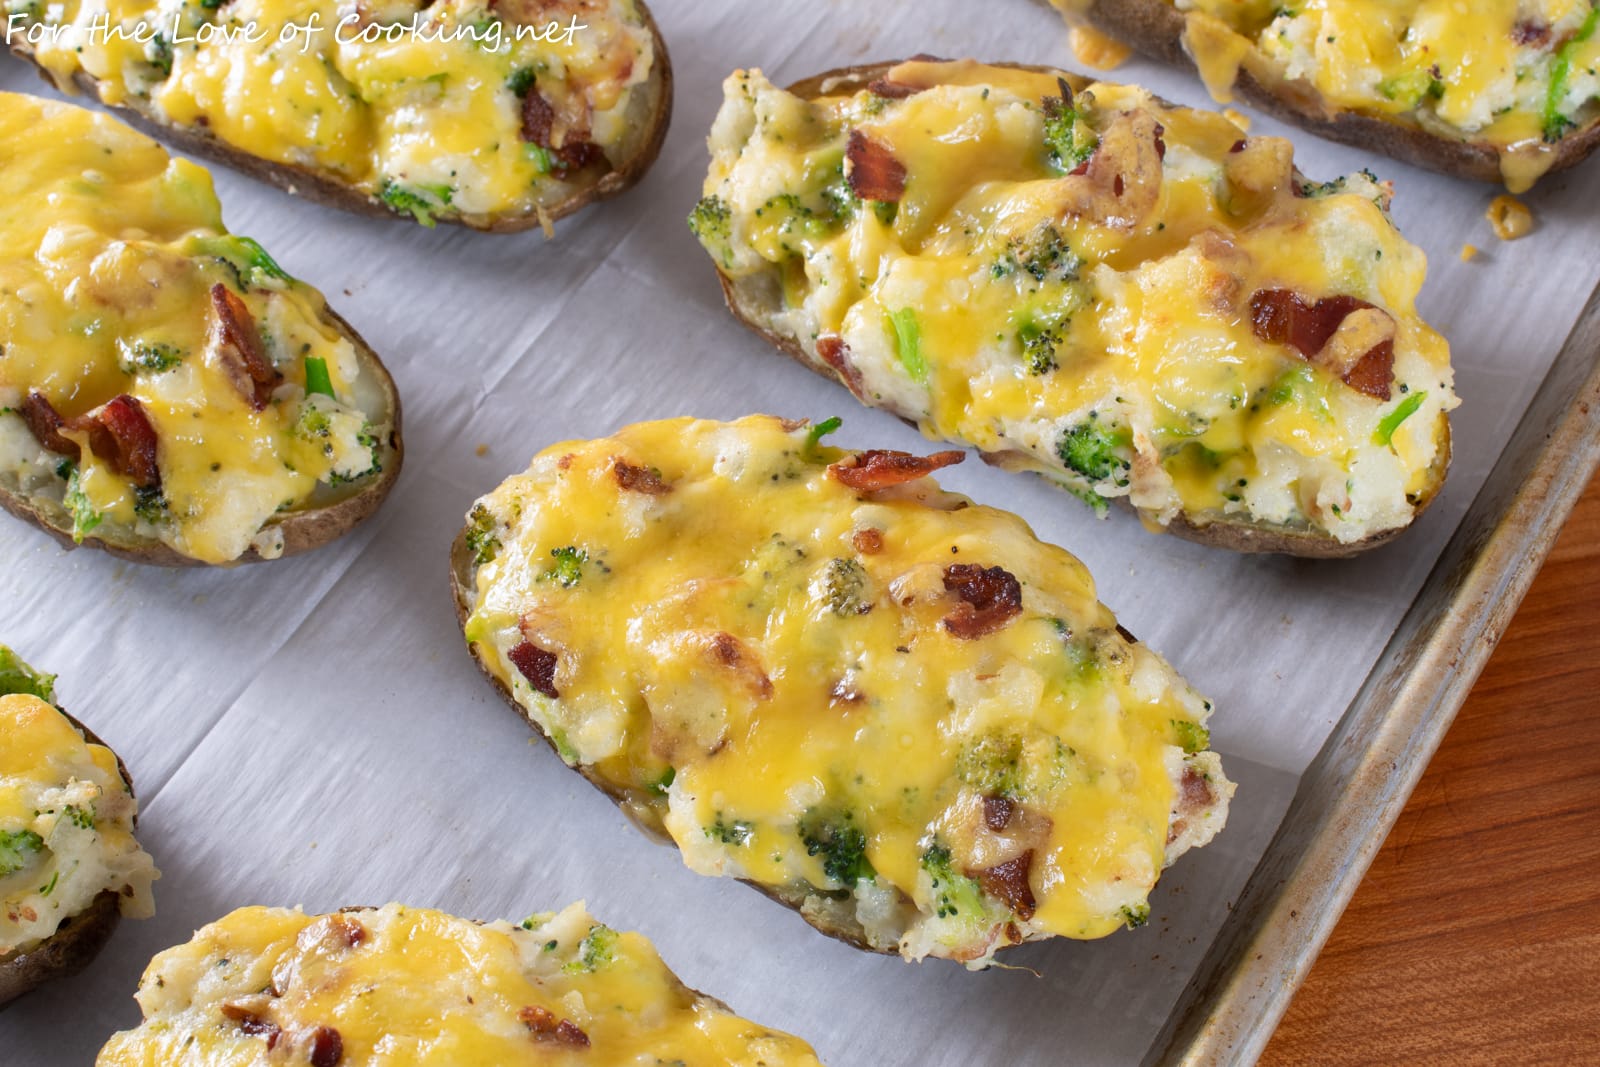 Broccoli Cheddar Twice Baked Potatoes with Bacon